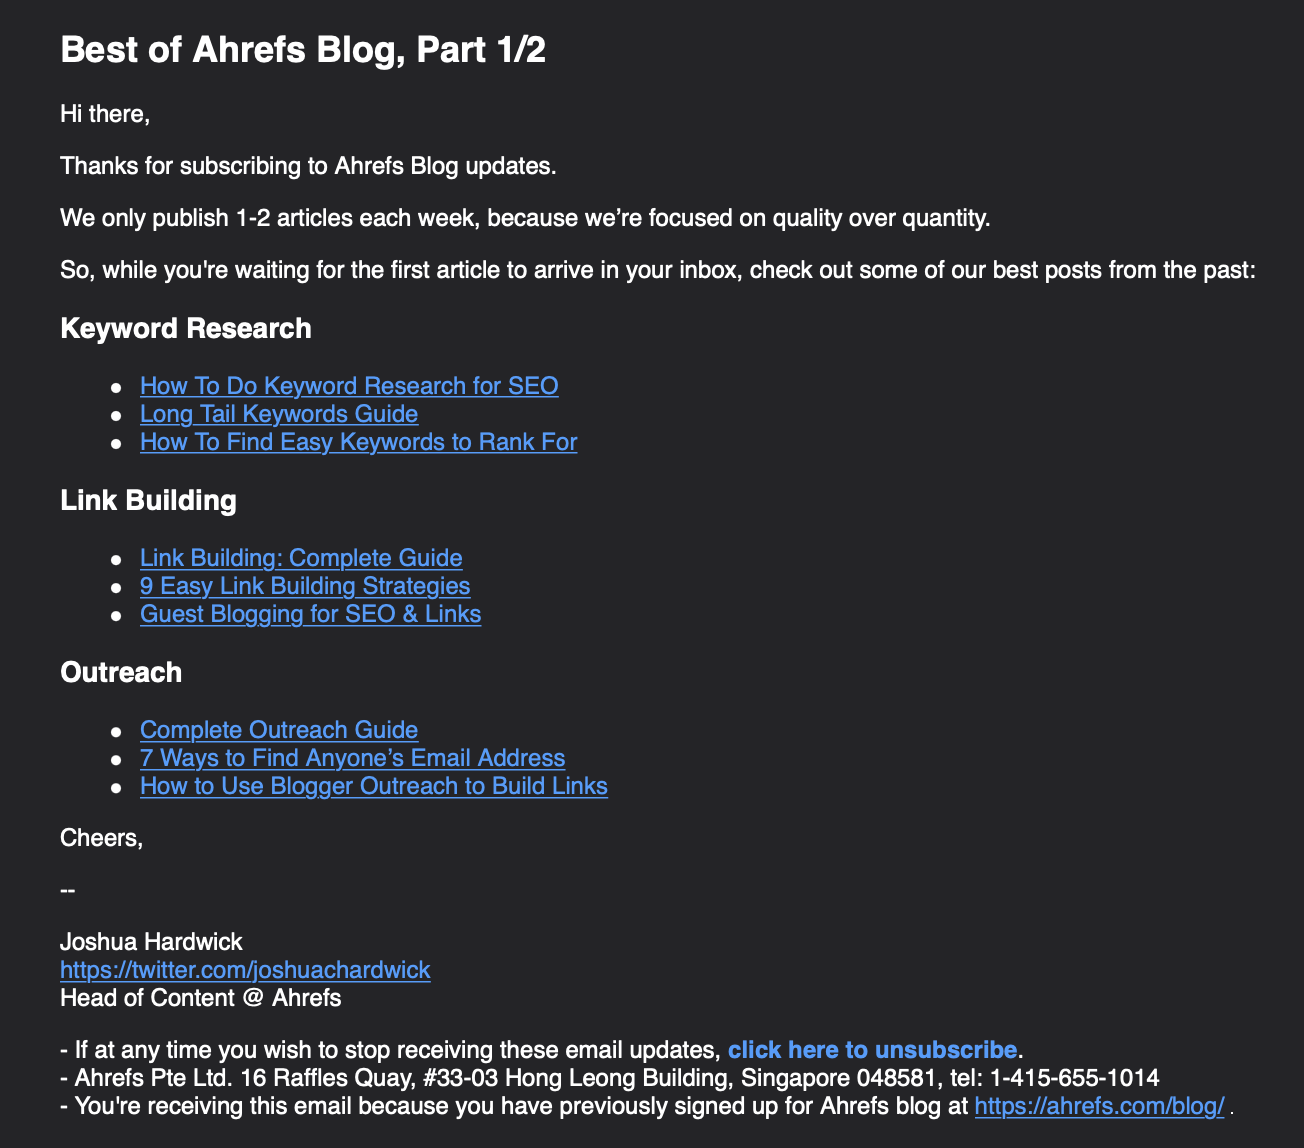 Email from Ahrefs sharing links to more content 